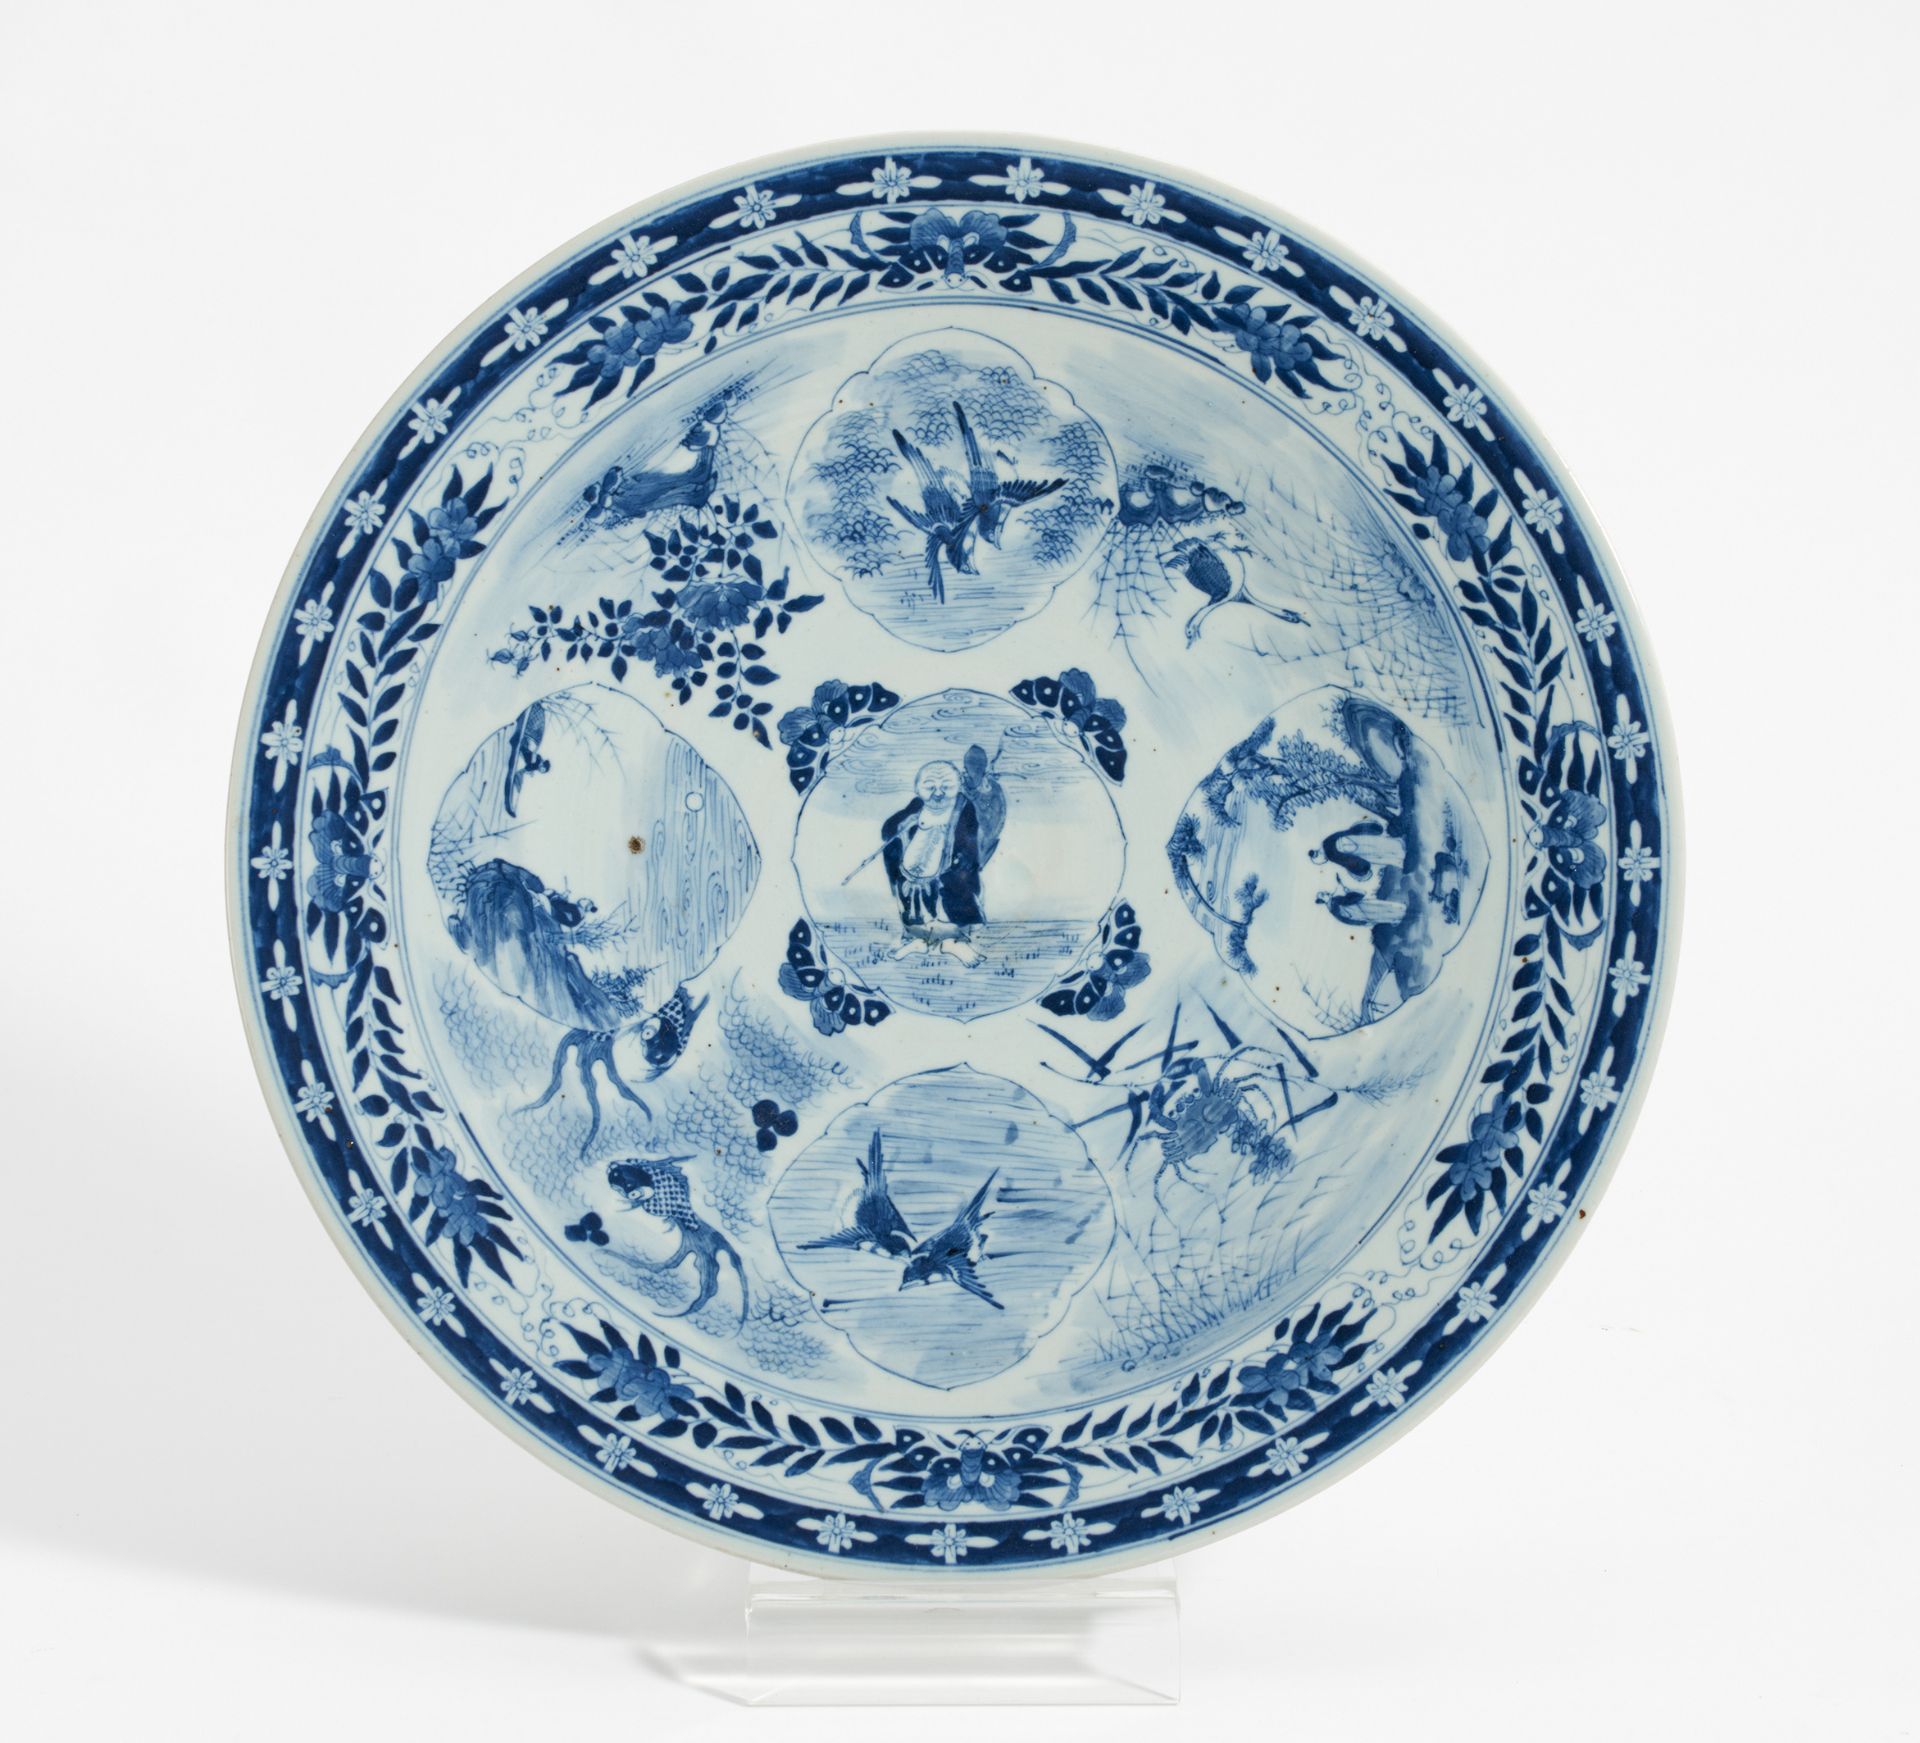 LARGE DISH WITH HOTEI, LANDSCAPE MEDALLIONS, BIRDS AND WATER ANIMALS. Japan. 19th c. Porcelain